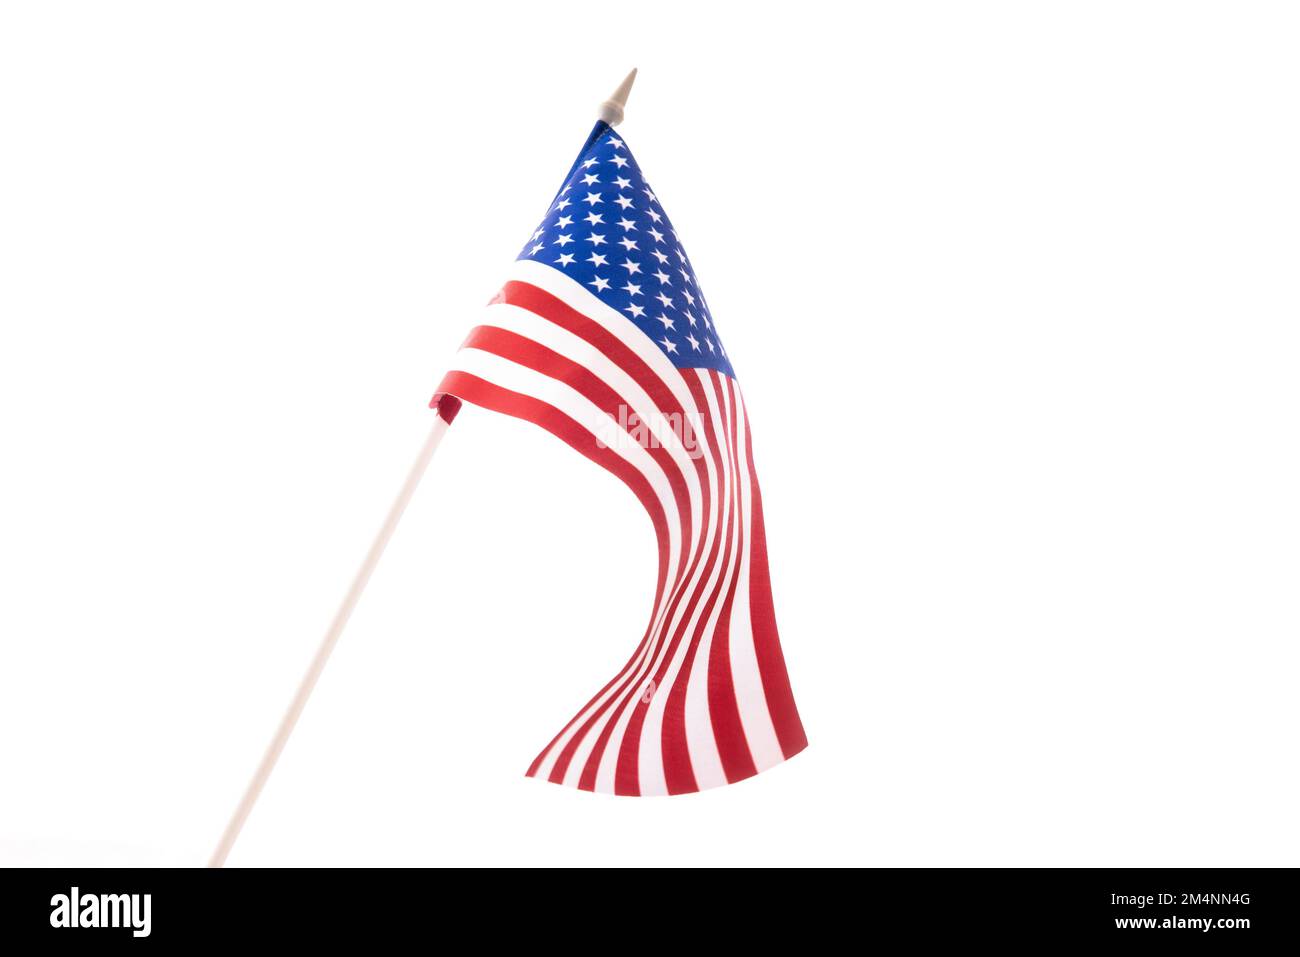 The U.S. flag is developing in the wind against a dark background. Isolate Stock Photo